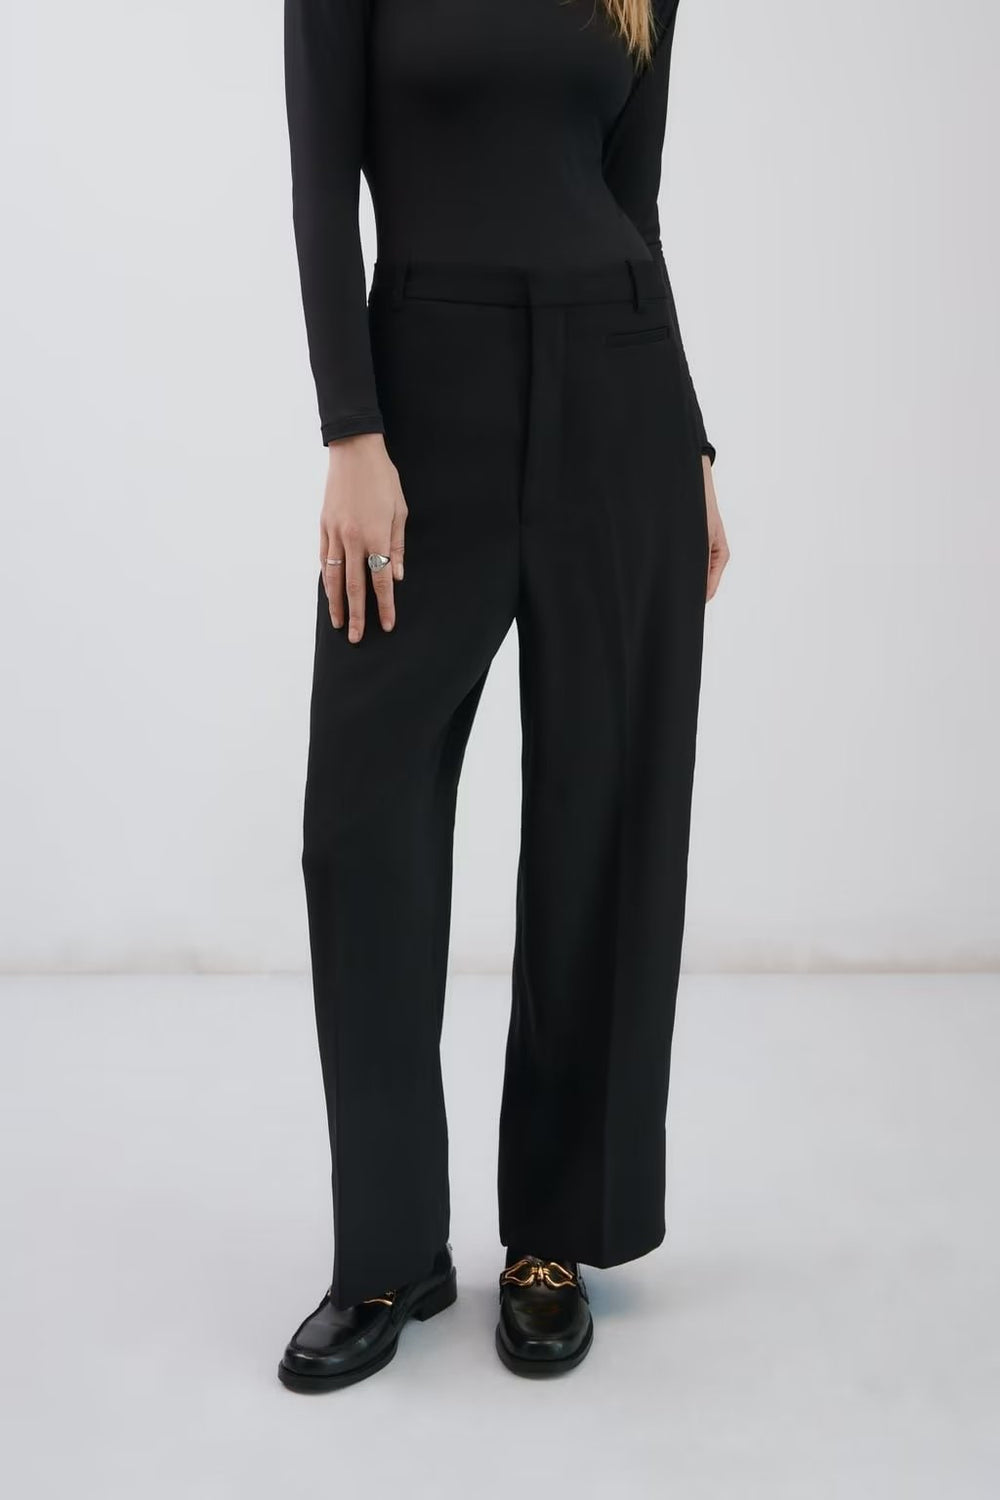 Solid Color Pleated High Waist Wide Leg Pants Ladies Lightly Mature Draped Mop Trousers